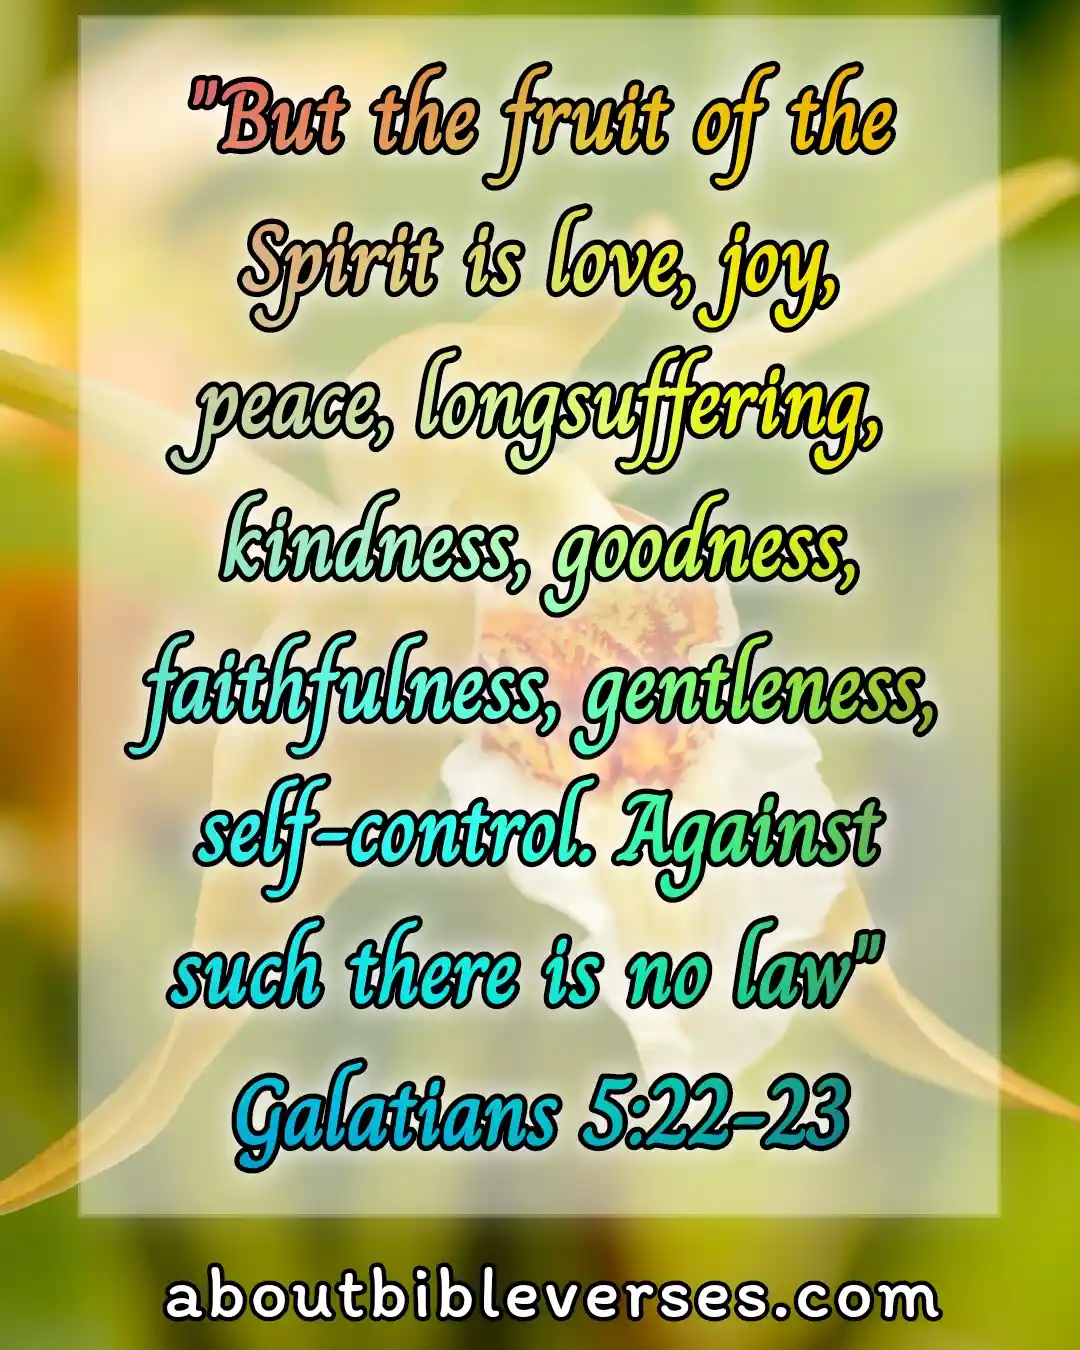 Bible Verses About Health And Wellness (Galatians 5:22-23)